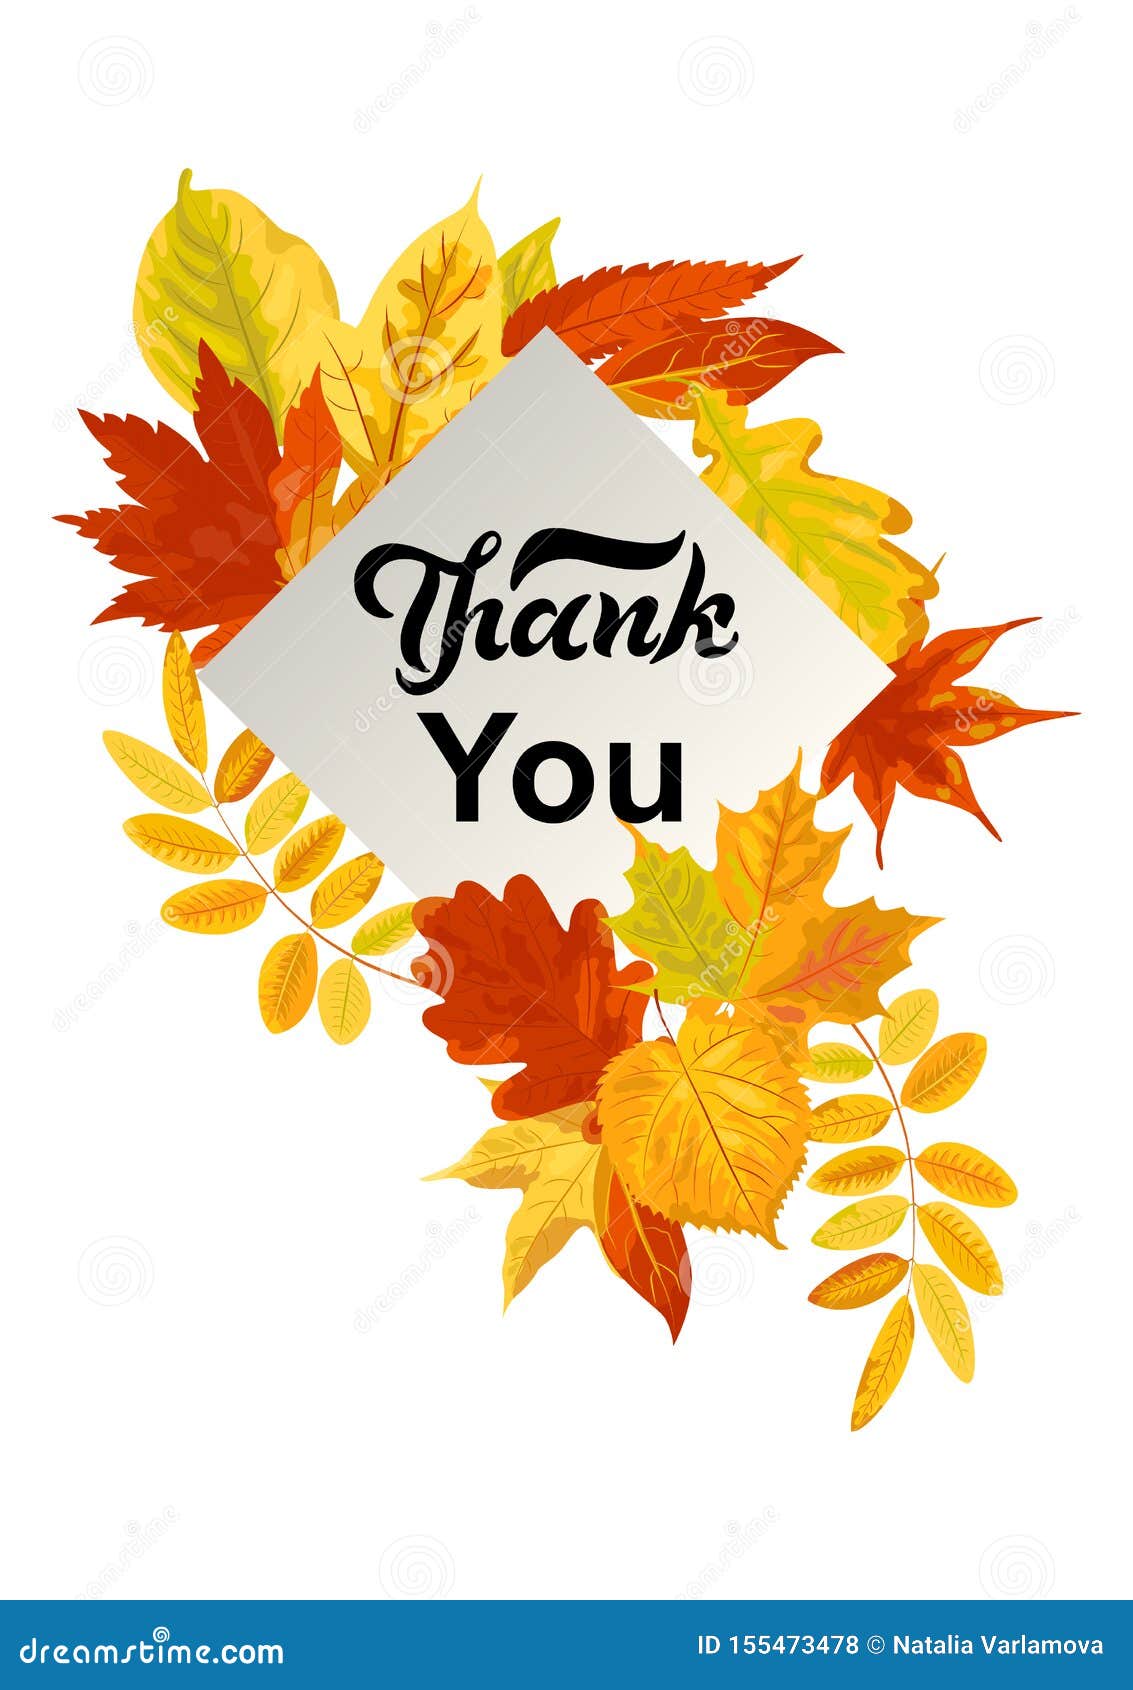 Thank You Autumn Vector Illustration With Falling Leaves Stock Vector Illustration Of Decoration Banner 155473478